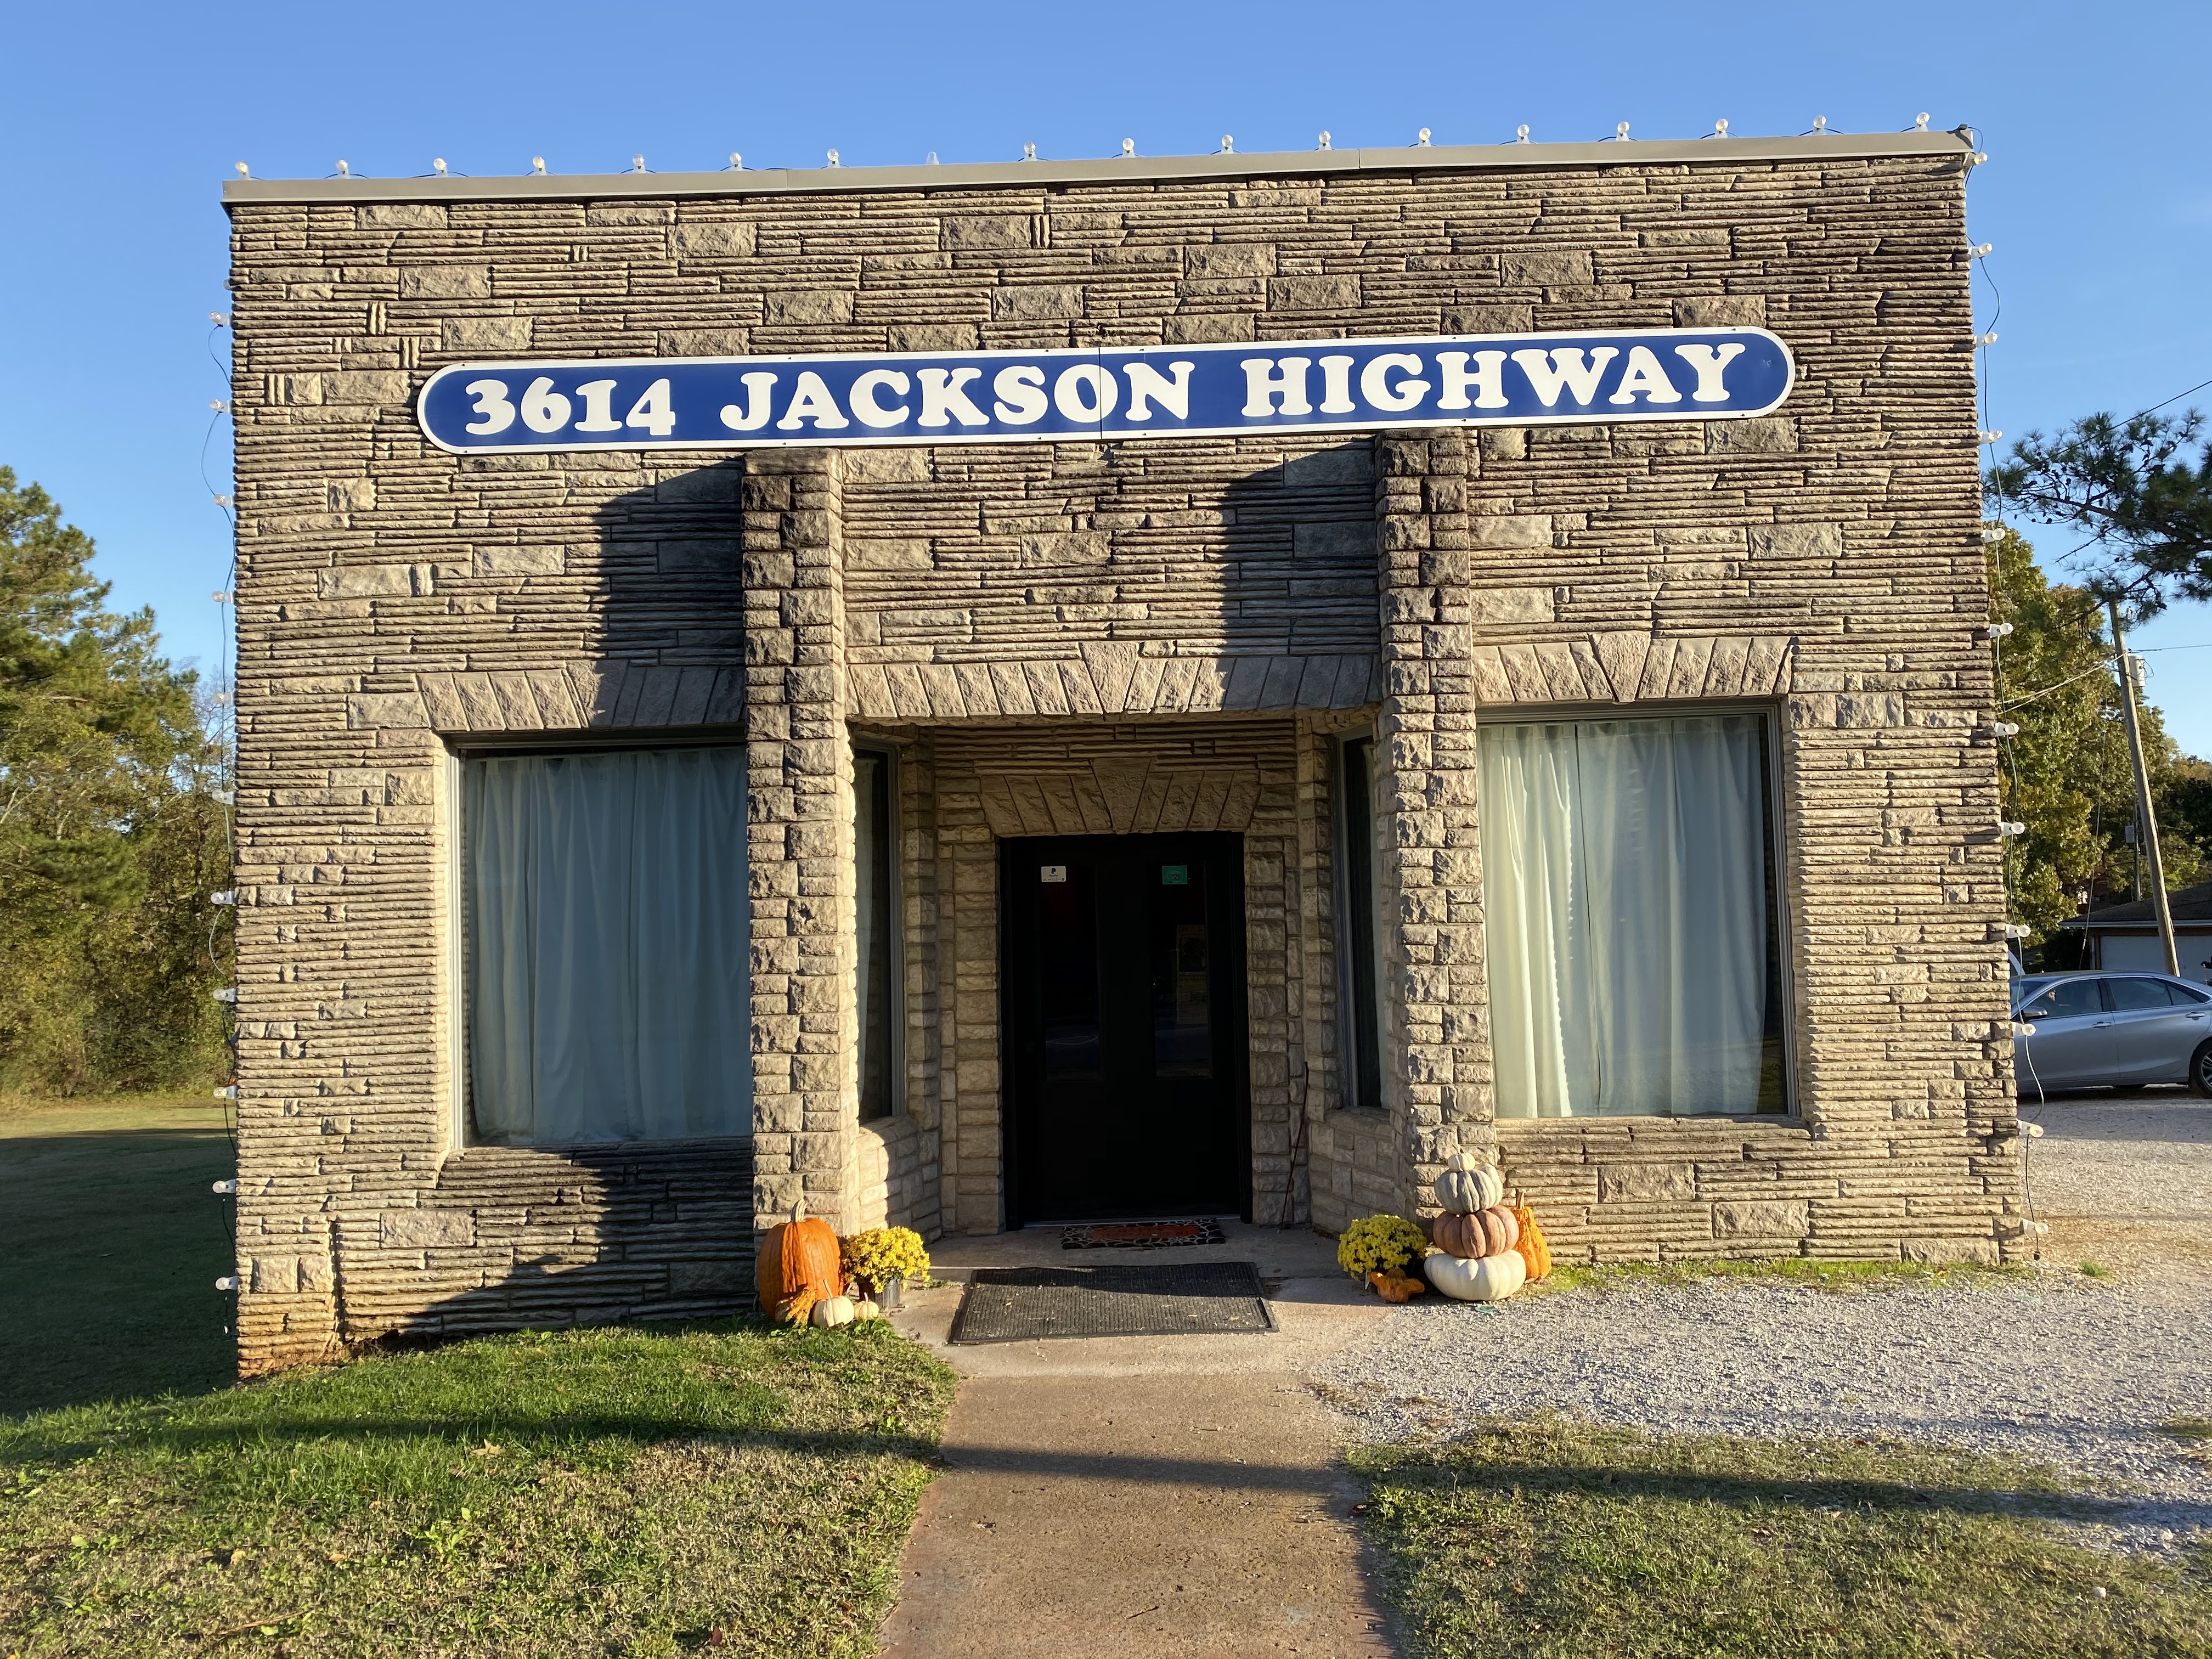 Picture of a place: Muscle Shoals Sound Studios